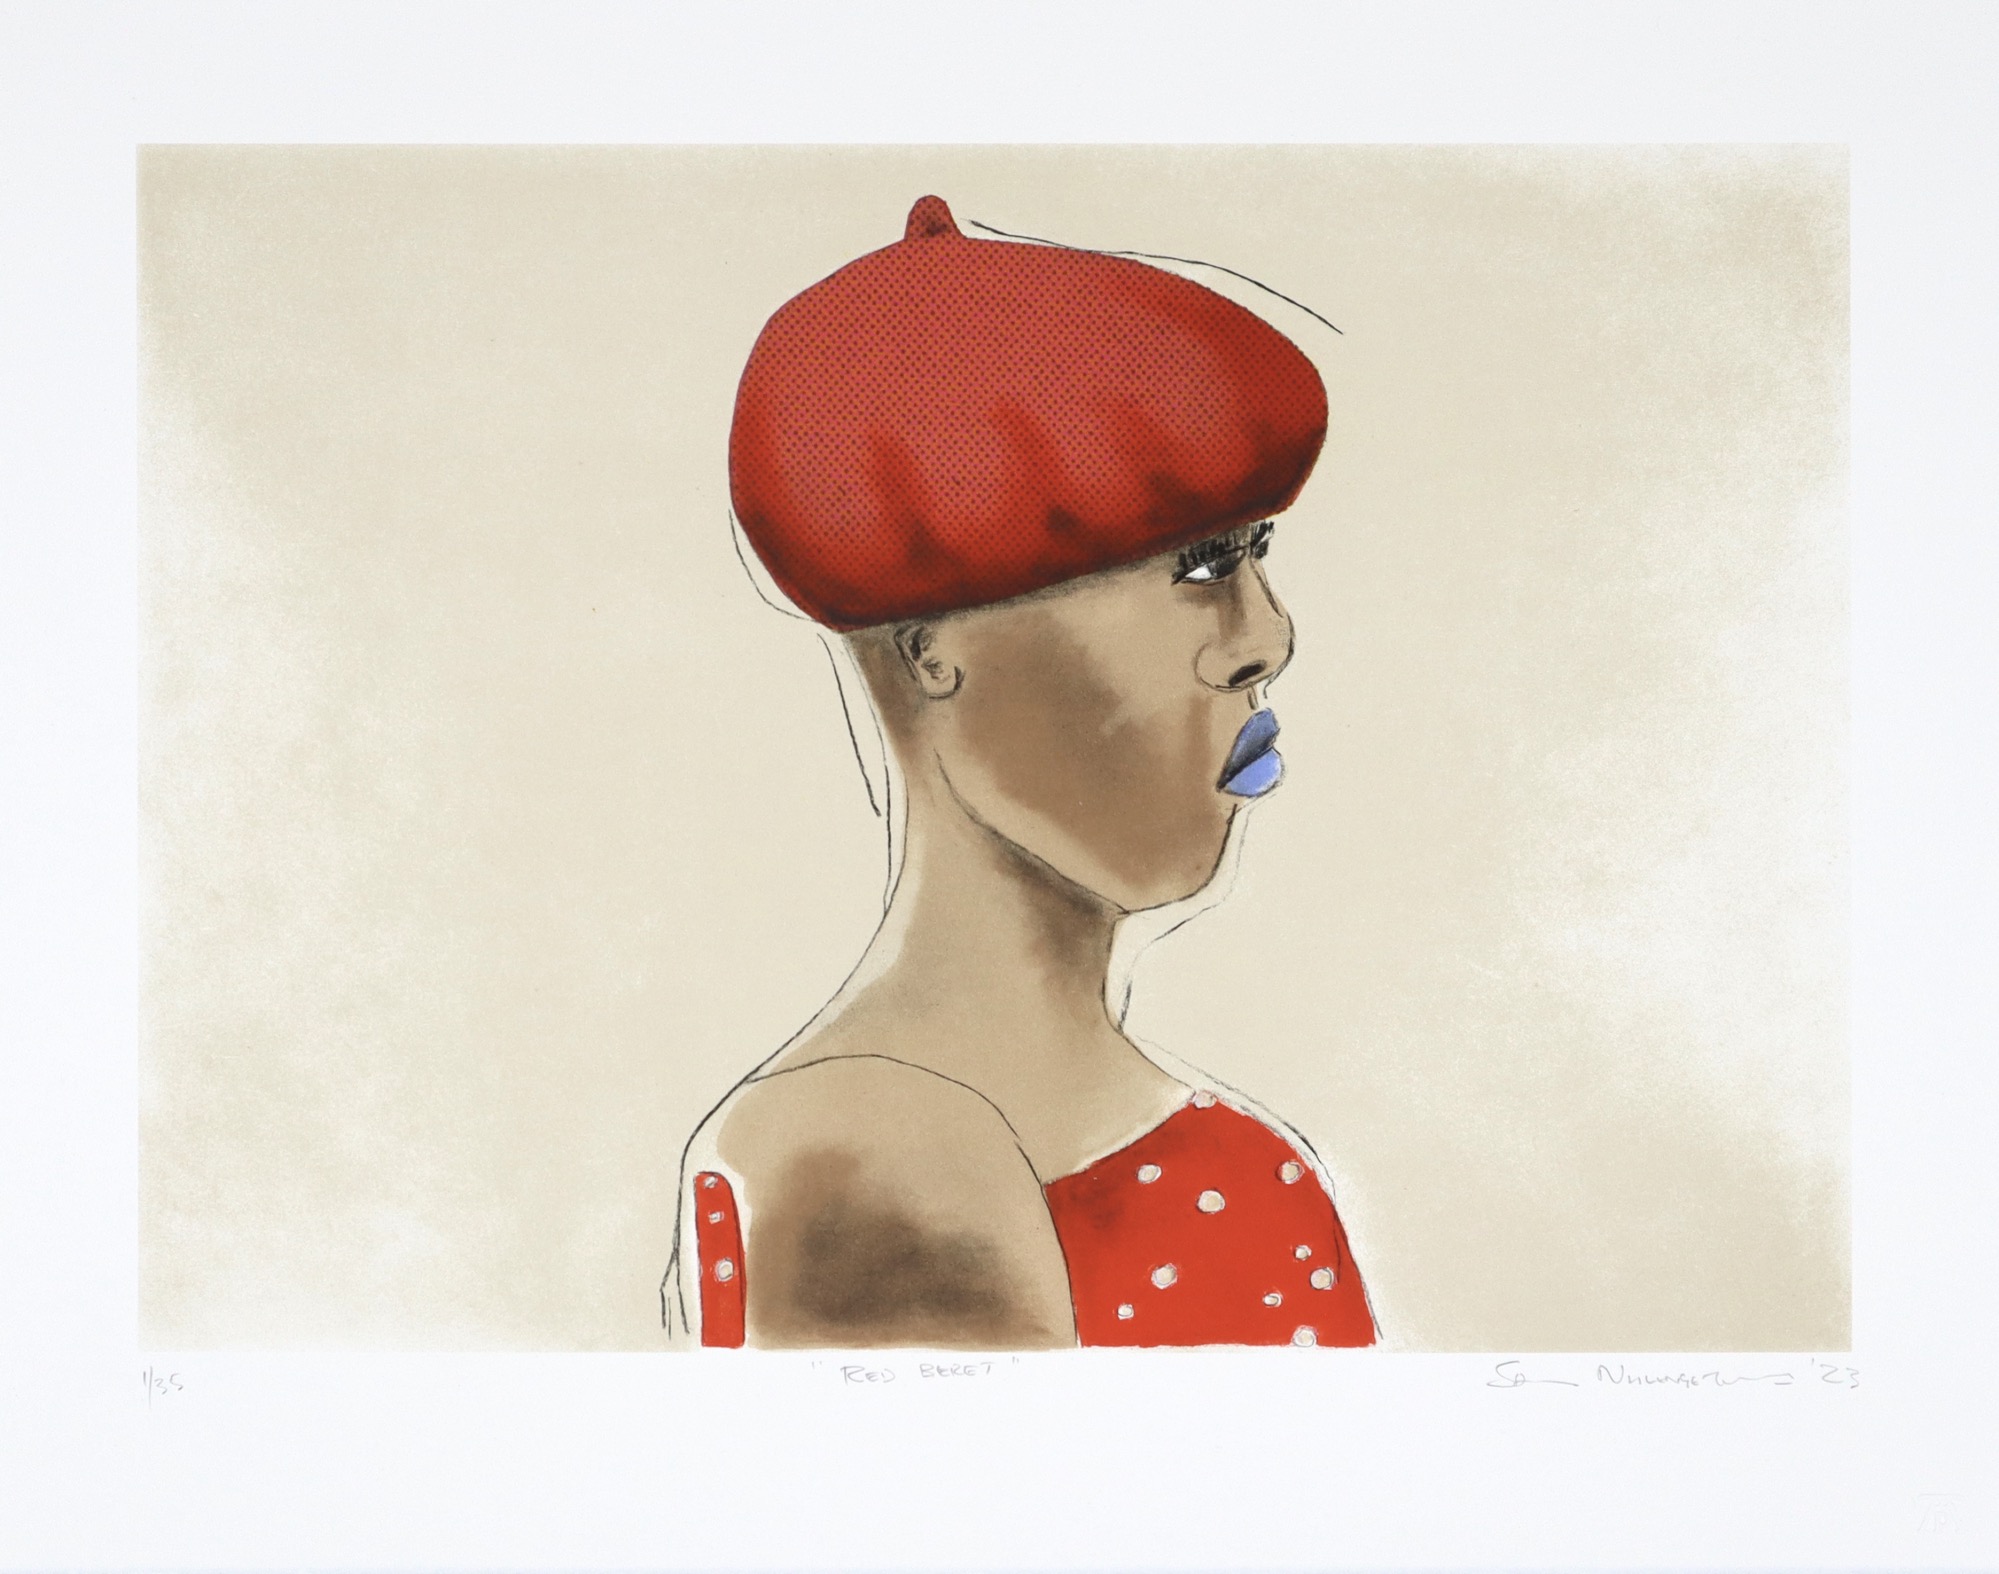 Sam Nhlengethwa woman in profile wearing red beret and blue lipstick, colour lithograph